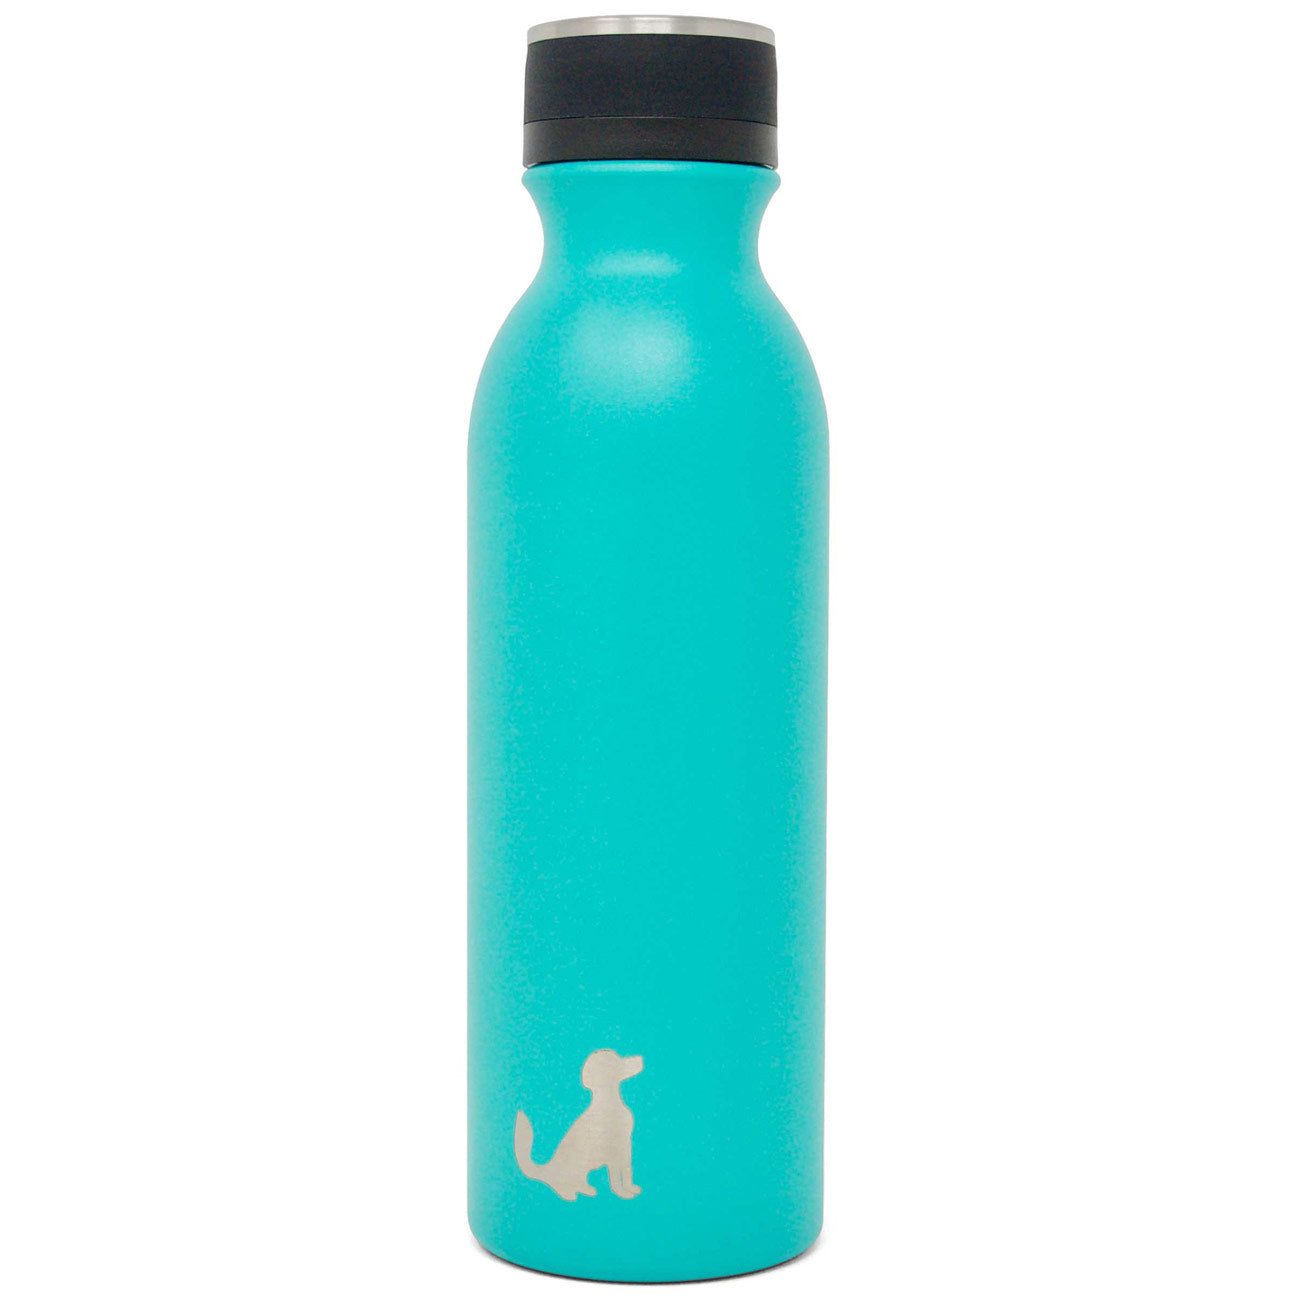 Swell Water Bottle Reviews: Is The Insulated Stainless Steel